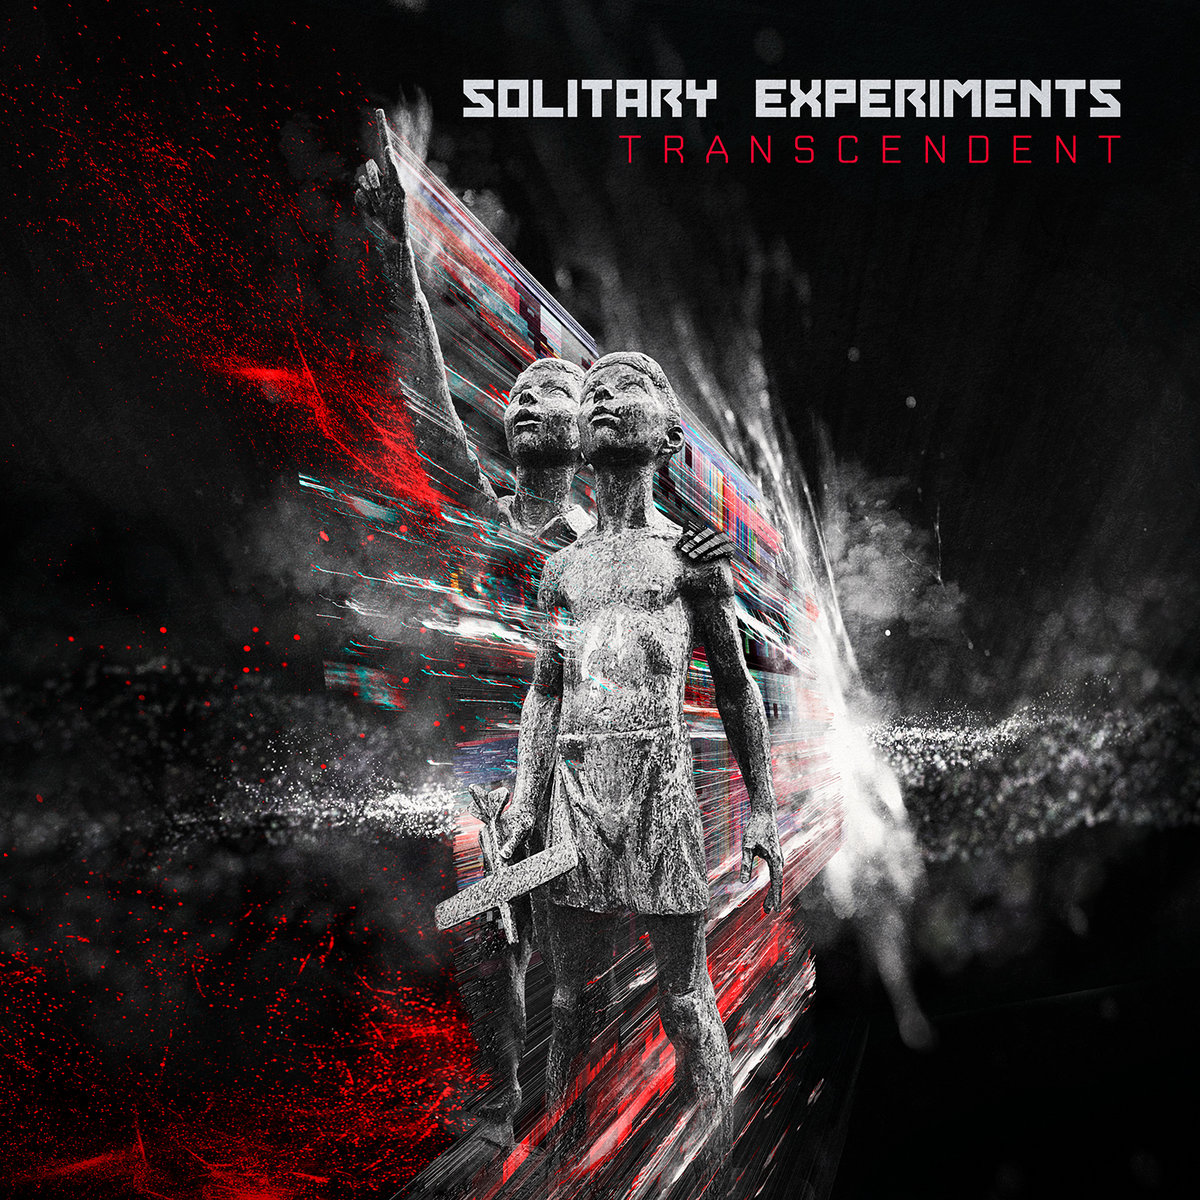 Solitary Experiments, “Transcendent”